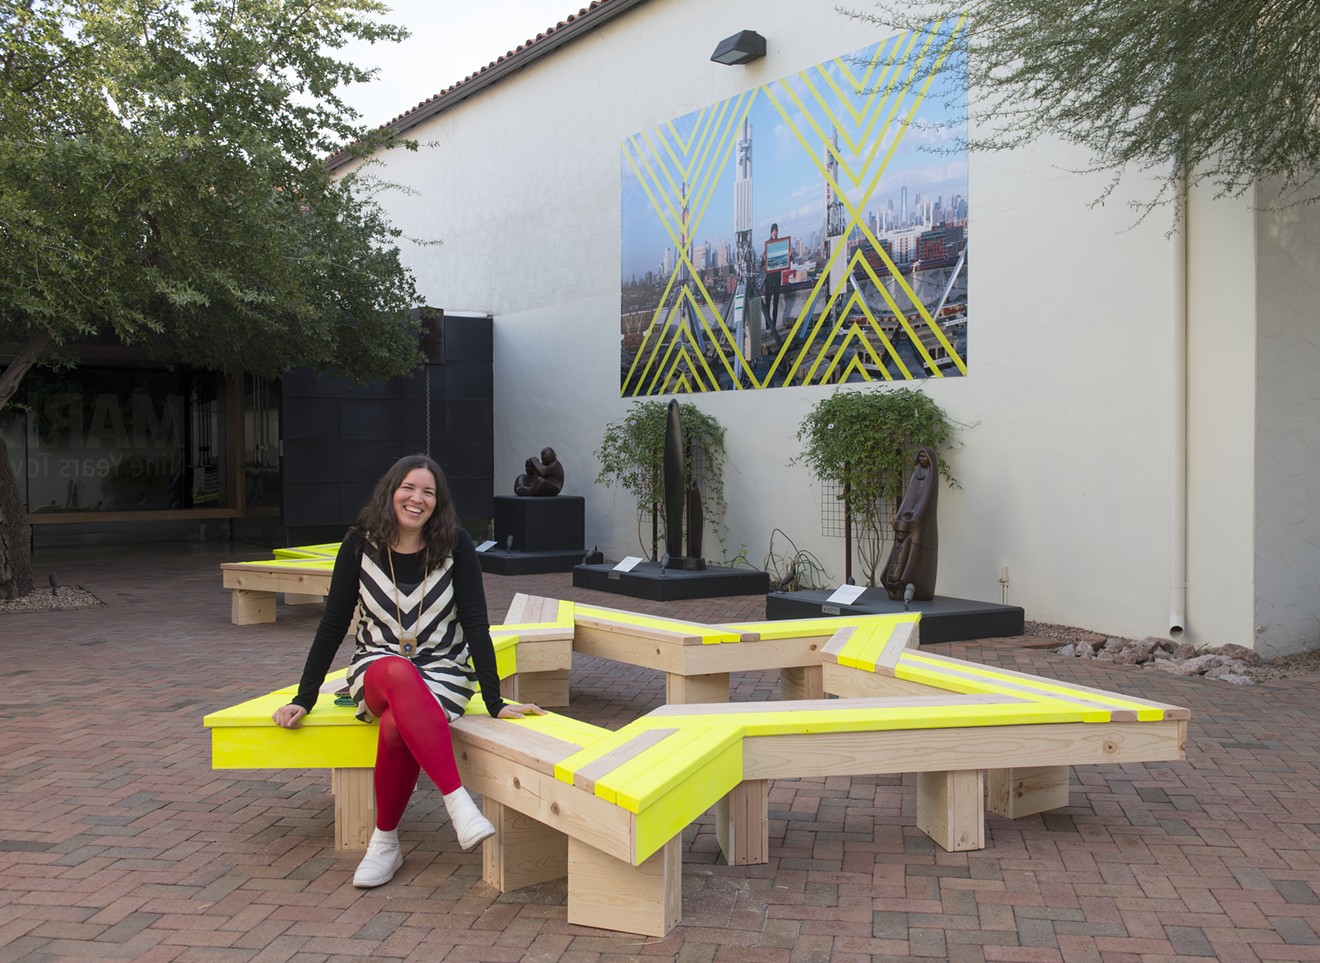 Maria Hupfield with her work exhibited in an outdoor courtyard at the Heard Museum.